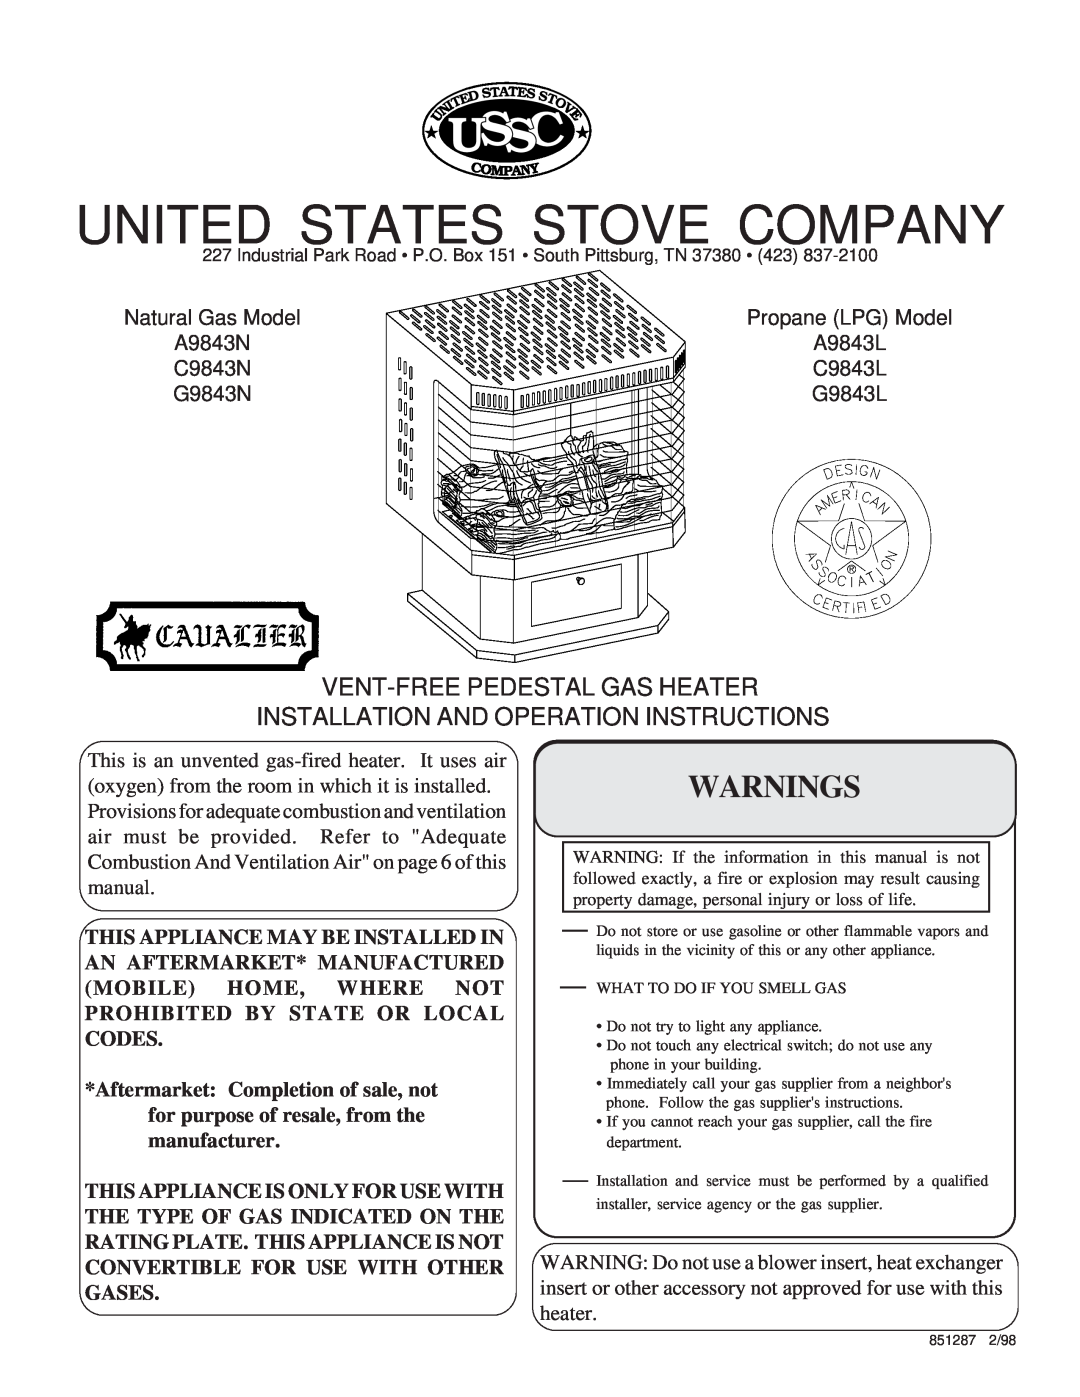 United States Stove G9843L, A9843N, C9843N, A9843L manual Ussc, Warnings, United States Stove Company, Es S, 851287 2/98 